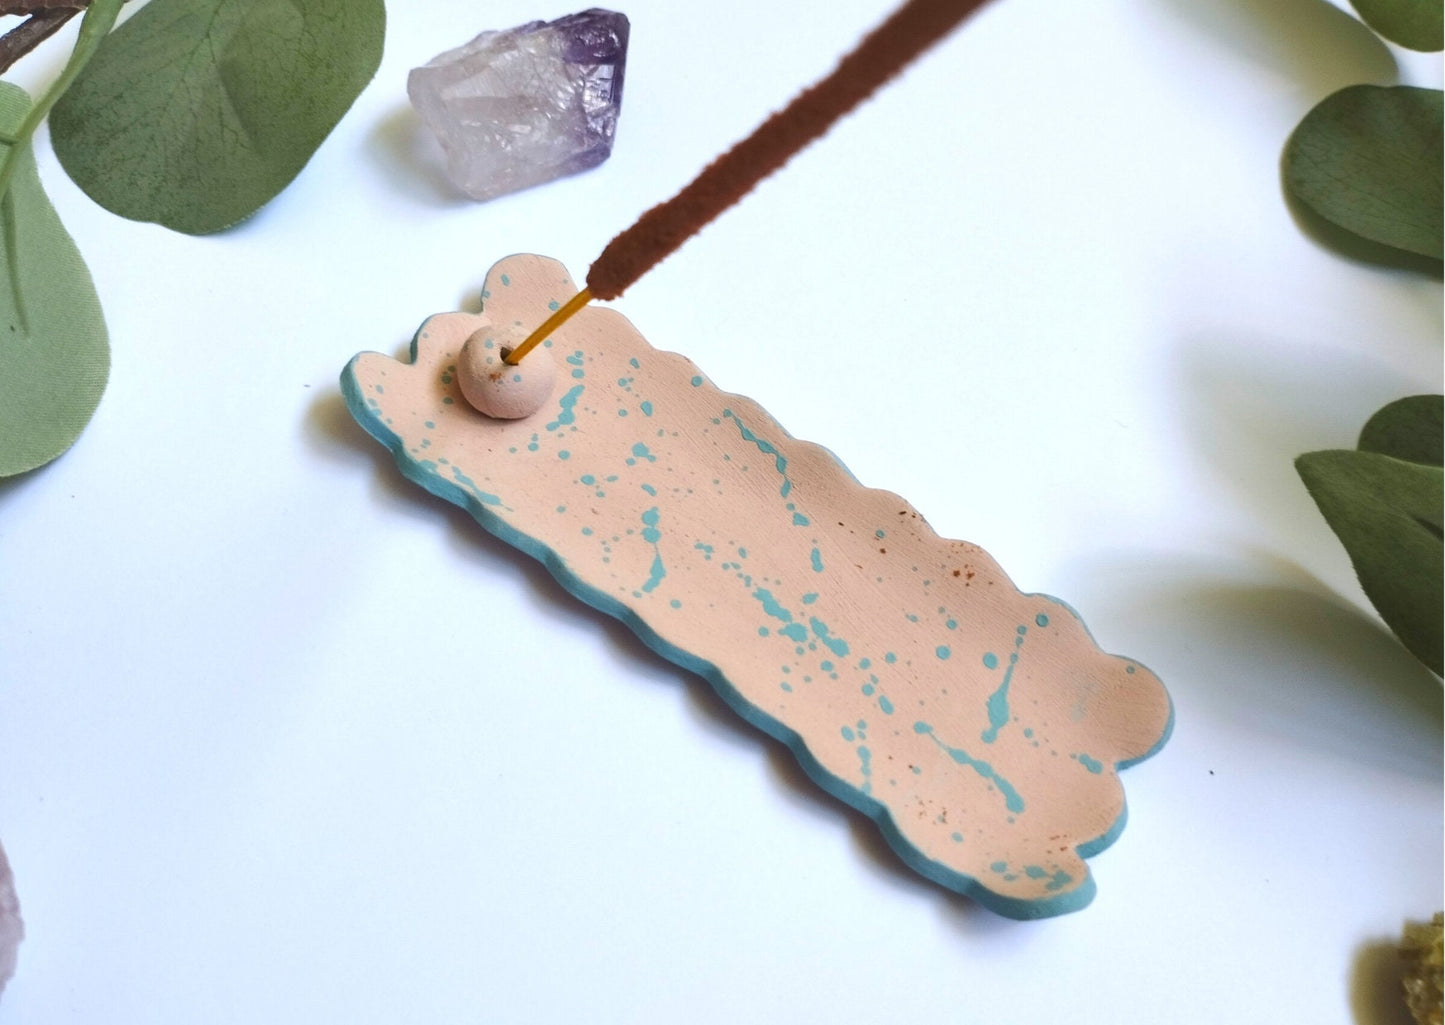 Handmade Pink and Blue Scalloped Edge Clay Incense Burner, incense stick holder, incense tray,